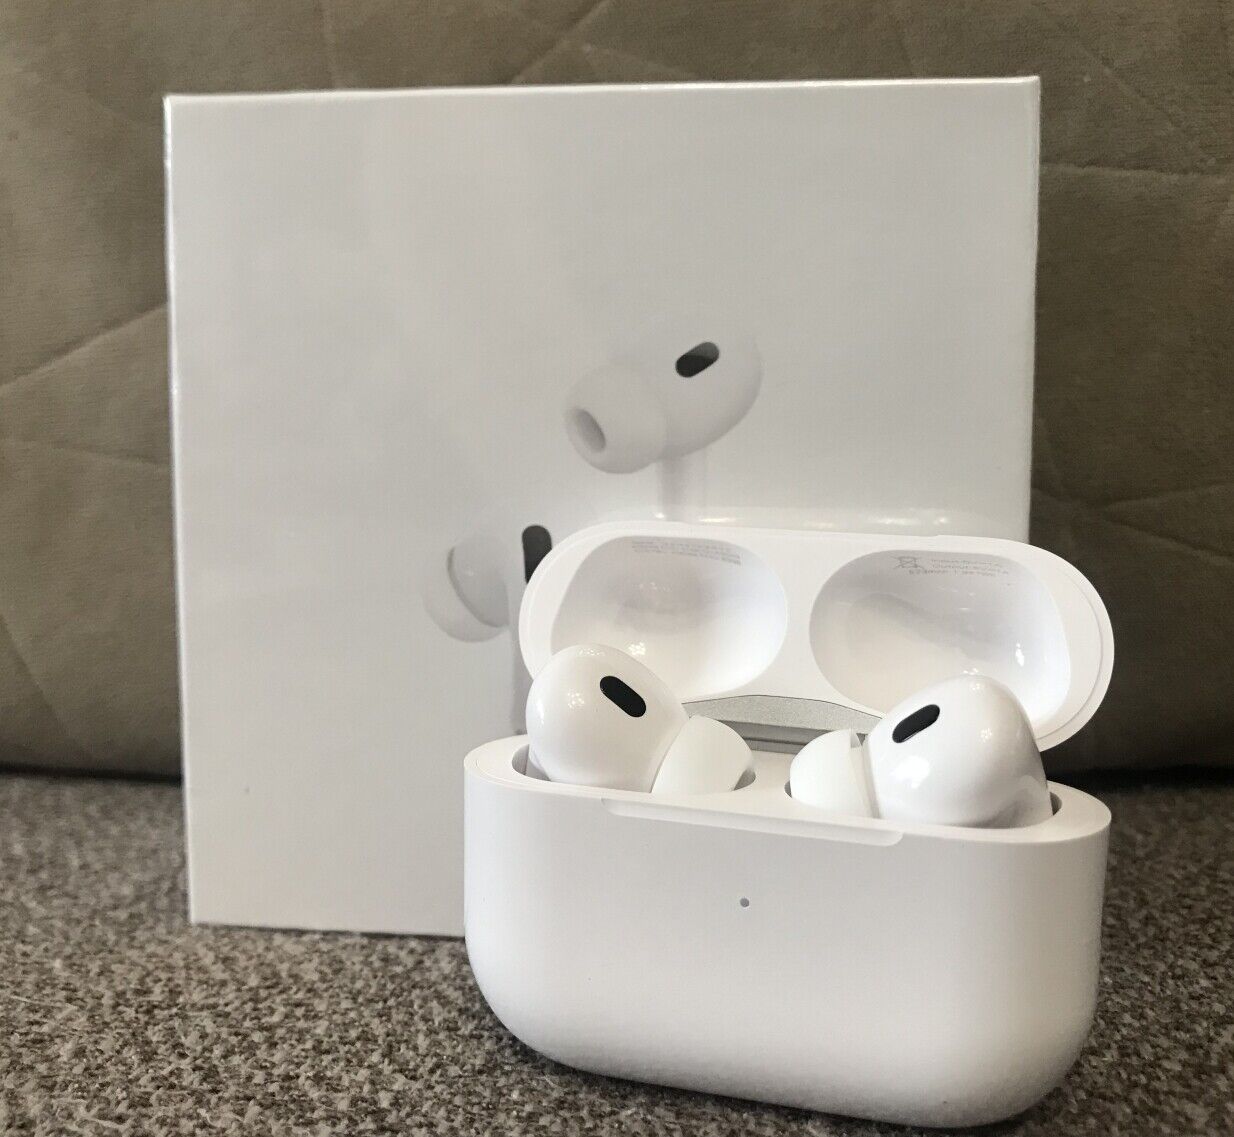 🎉US Stock Apple AirPods Pro Gen 2 with Premium MagSafe Wireless Charging Case🎧